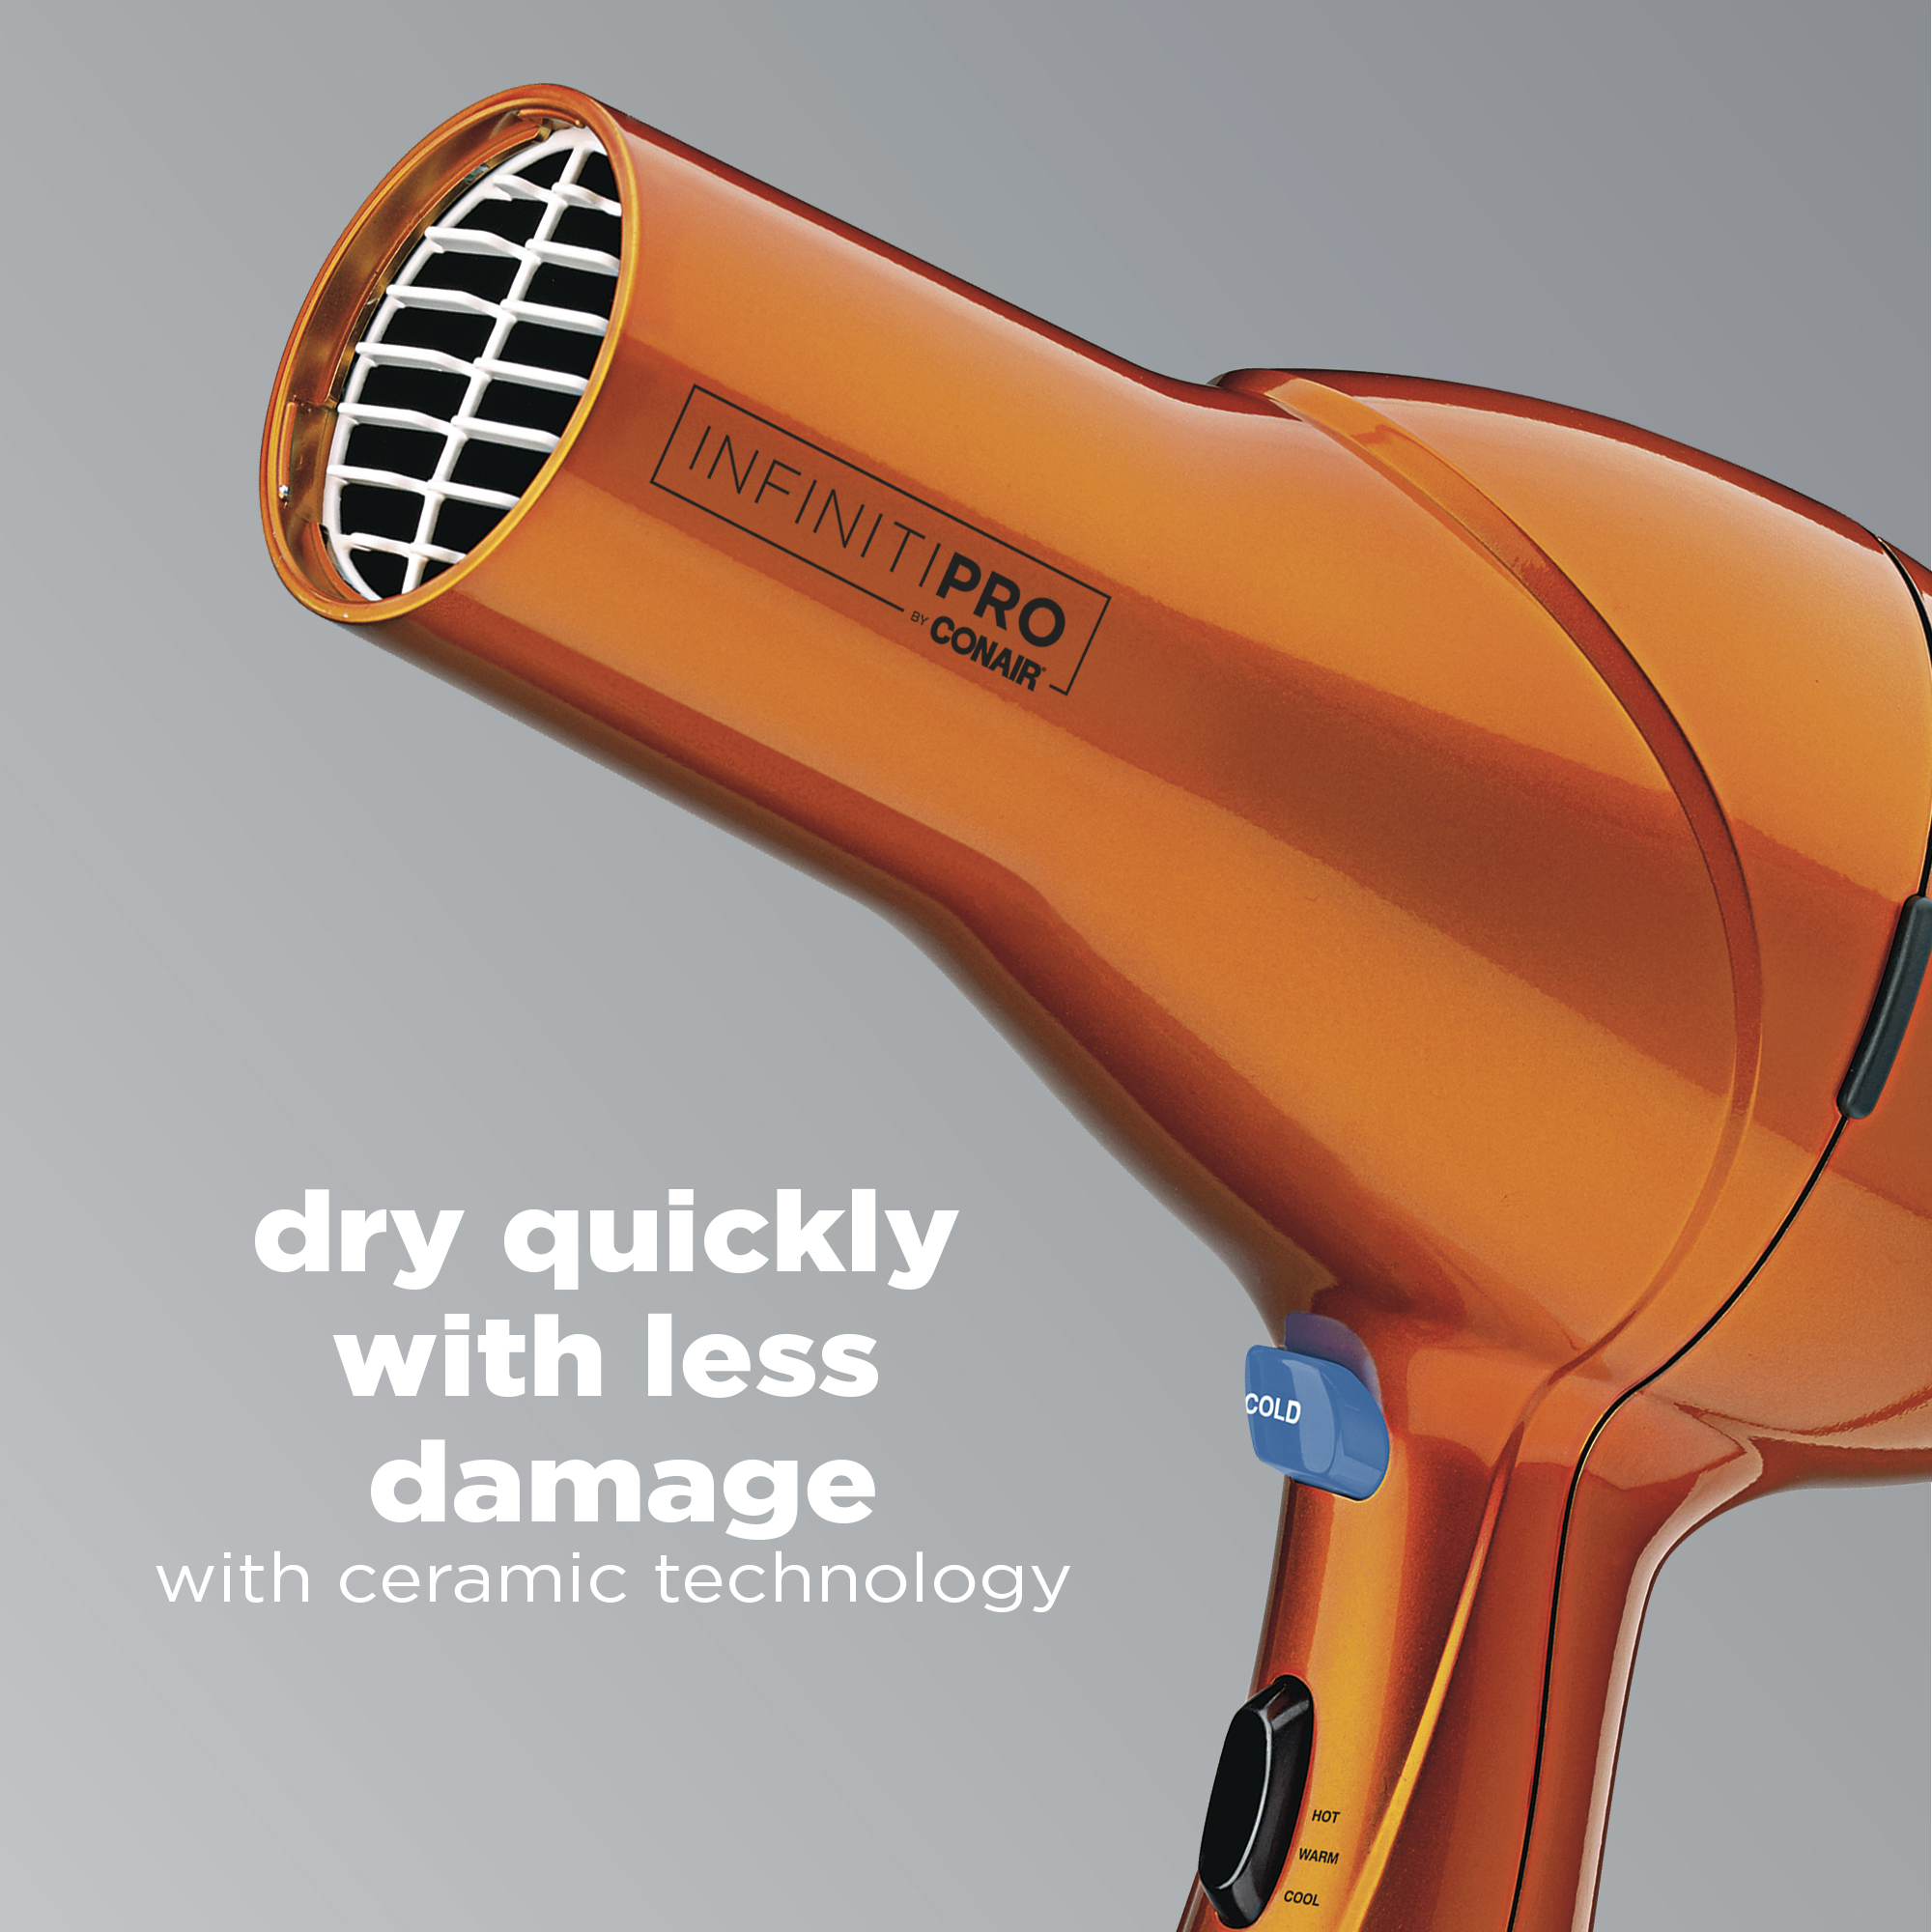 InfinitiPro by Conair Quick Styling Salon Professional Ionic & Ceramic Hair Dryer, 1875 Watts, Orange 259TPTY - image 2 of 7